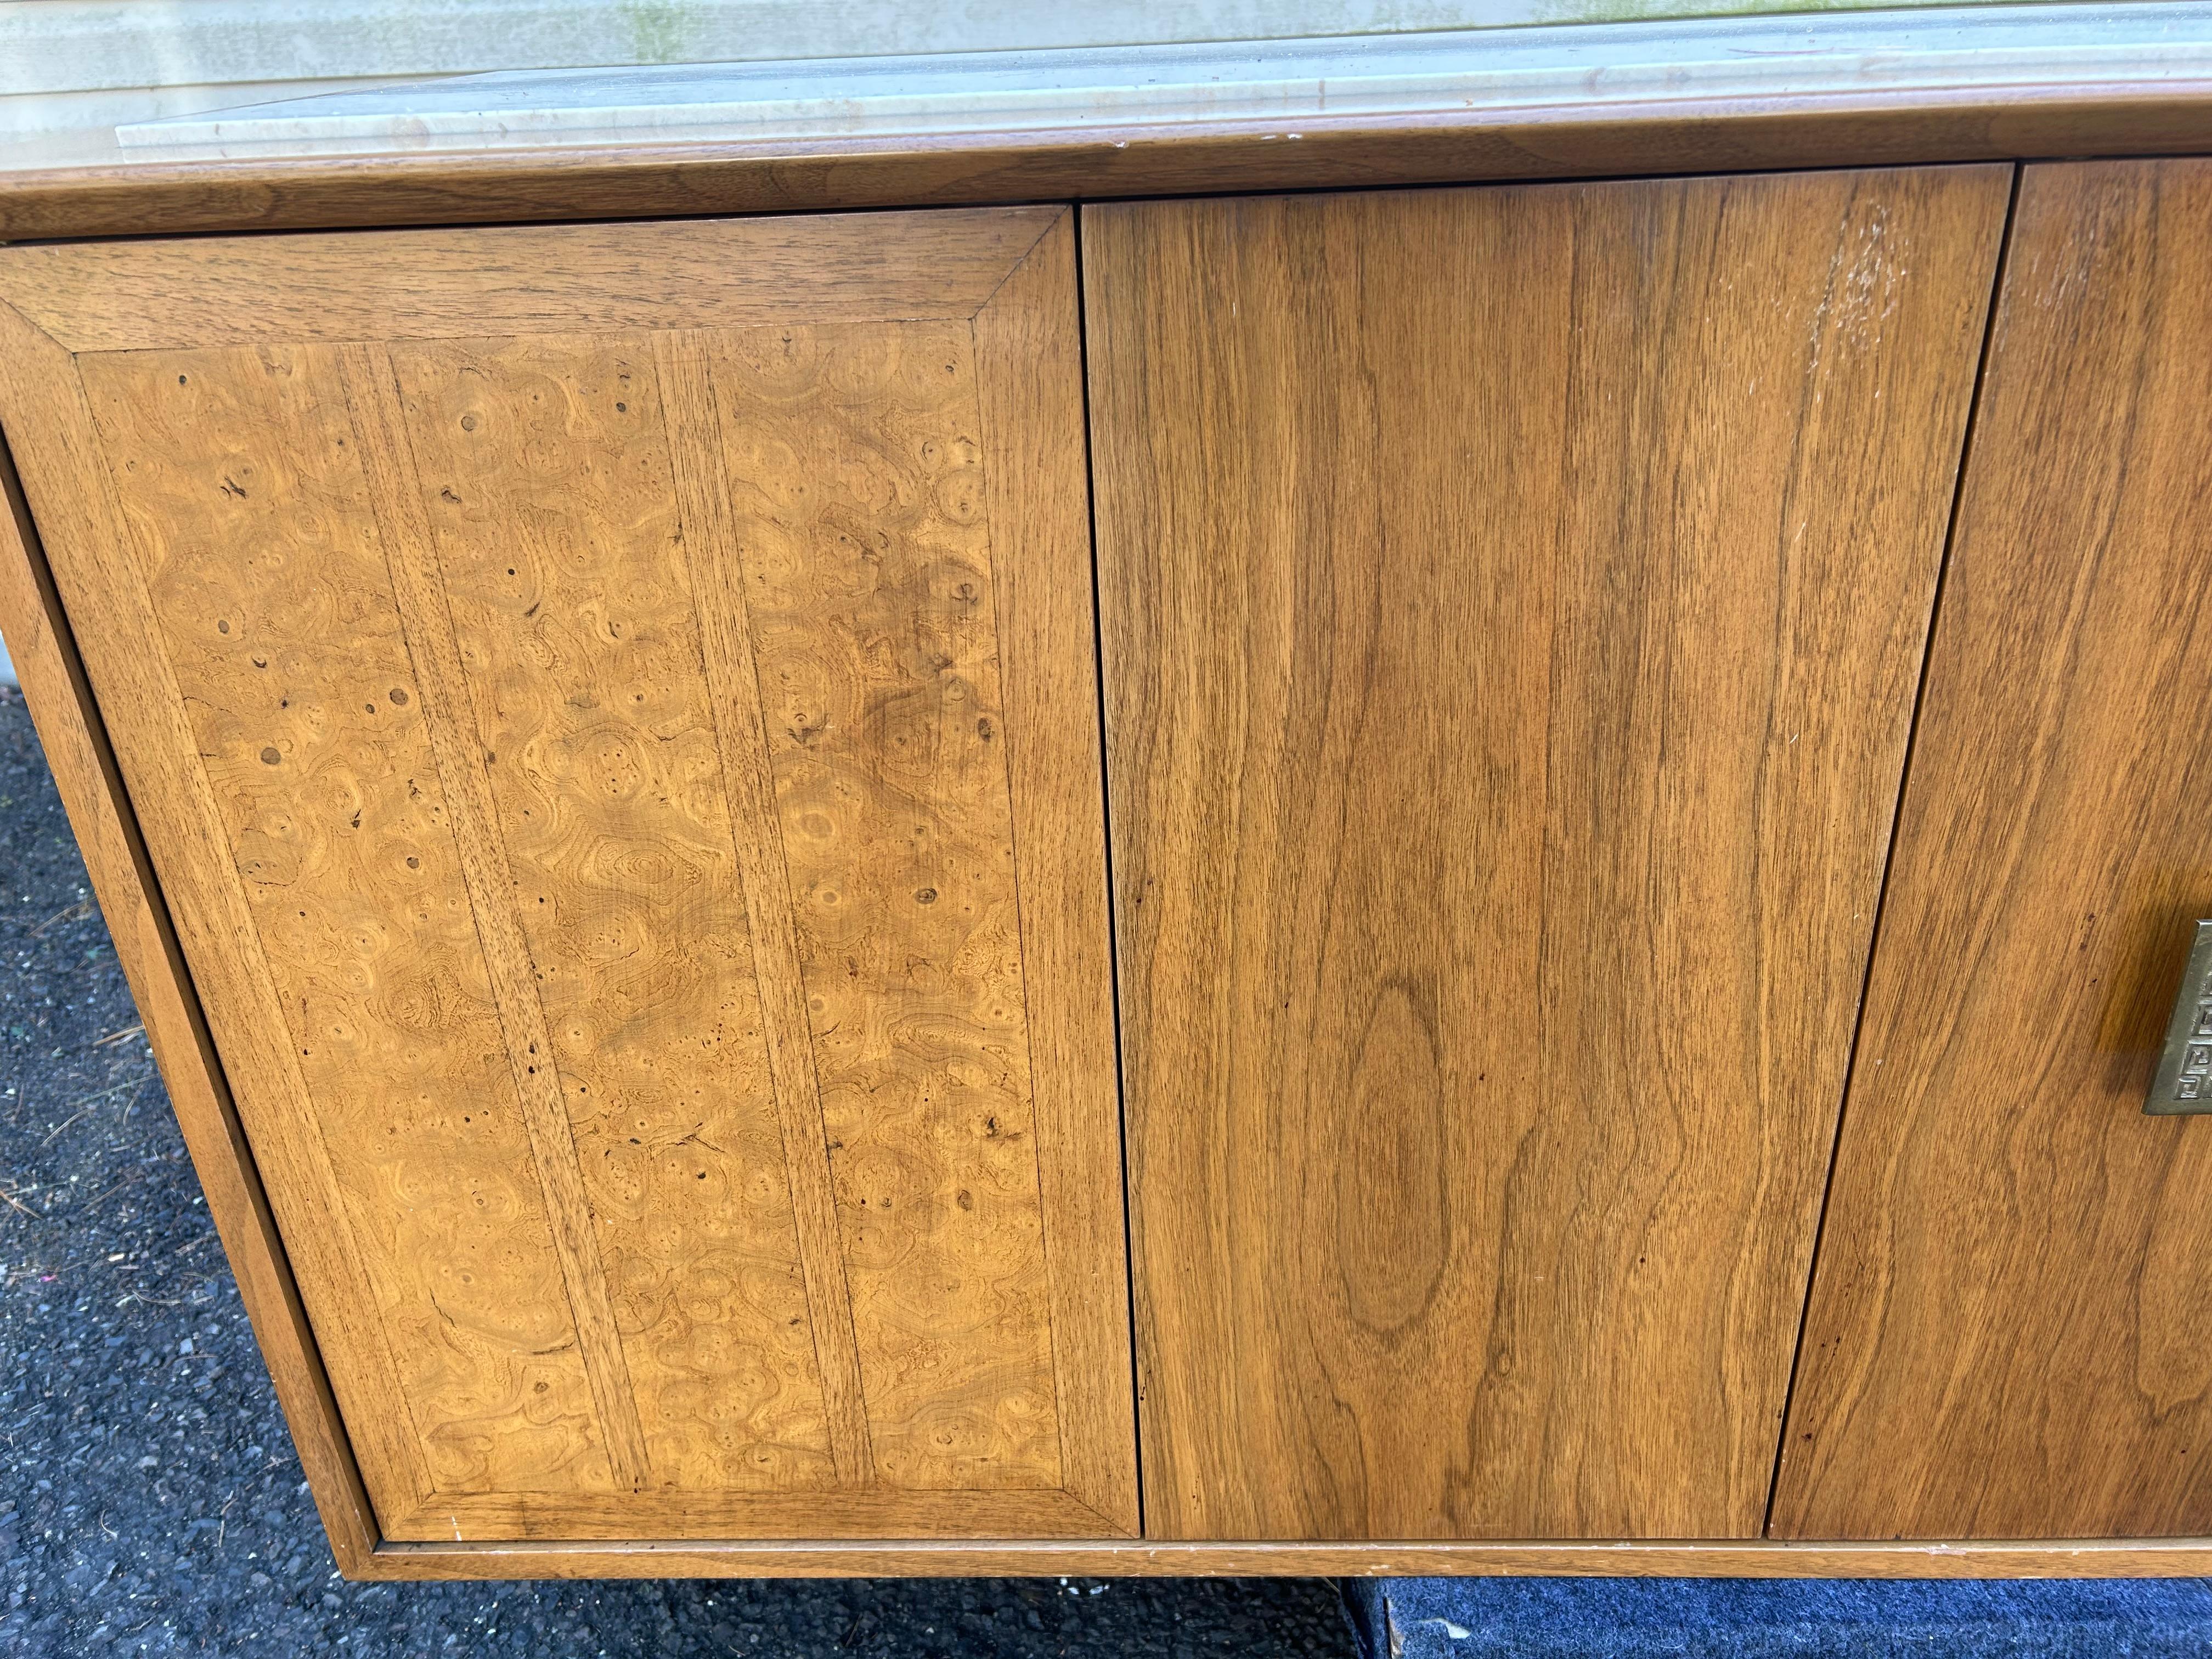 Wonderful Mid-Century Burl Wood Travertine Floating Hanging Cabinet Credenza In Good Condition For Sale In Pemberton, NJ